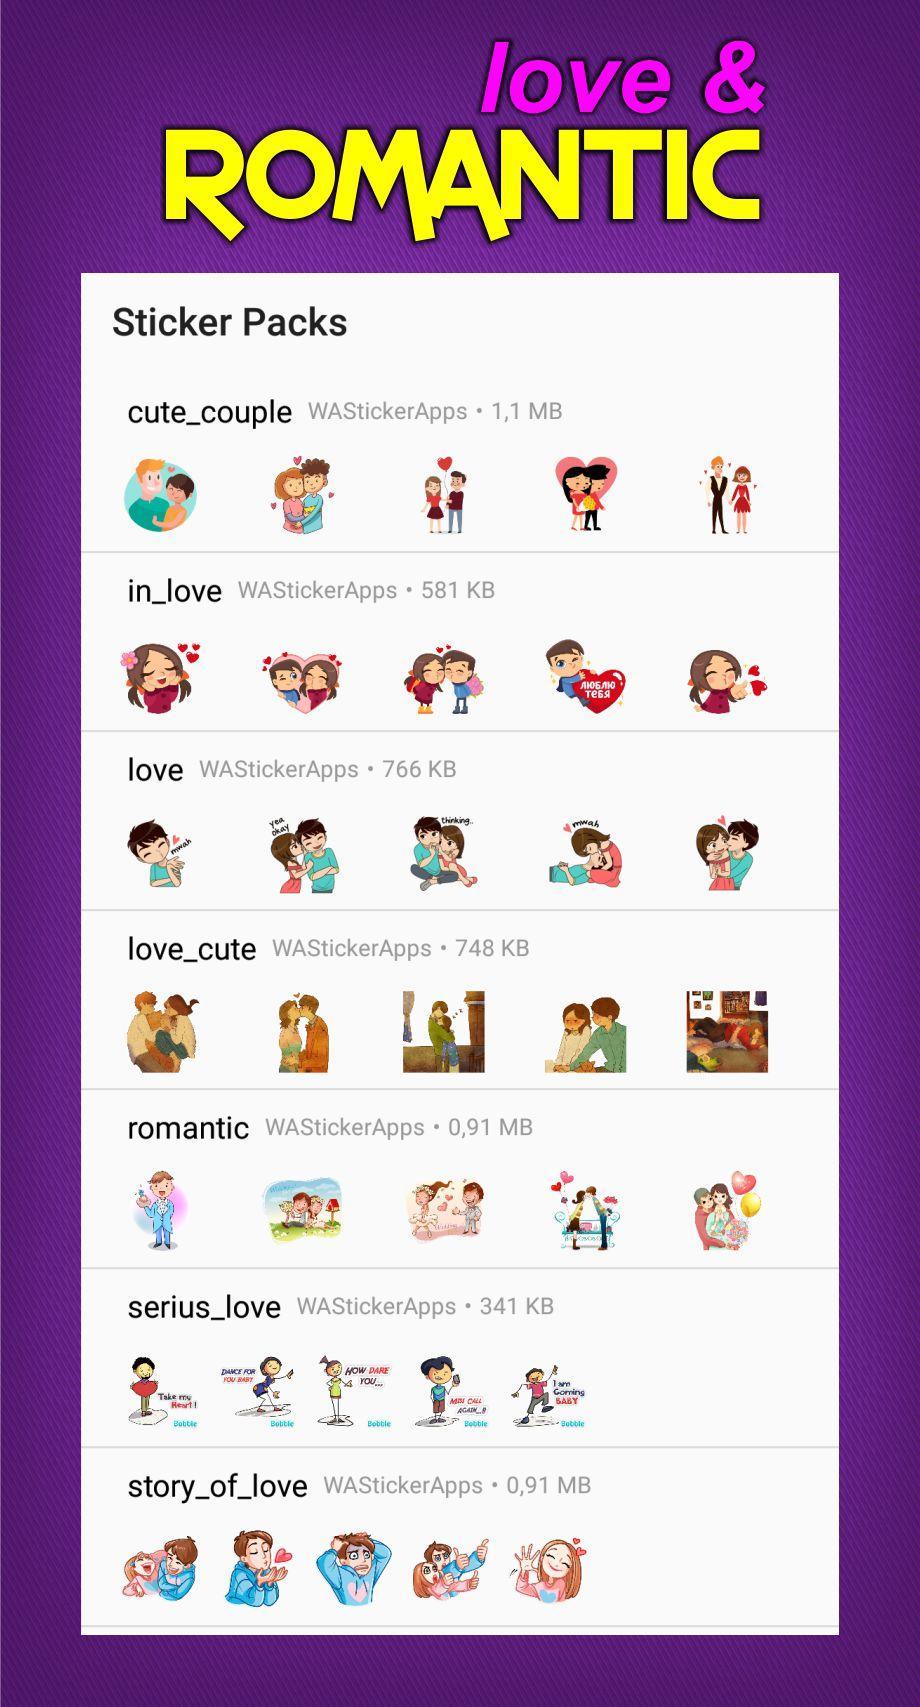 Romantis Love Sticker For Wa For Android Apk Download